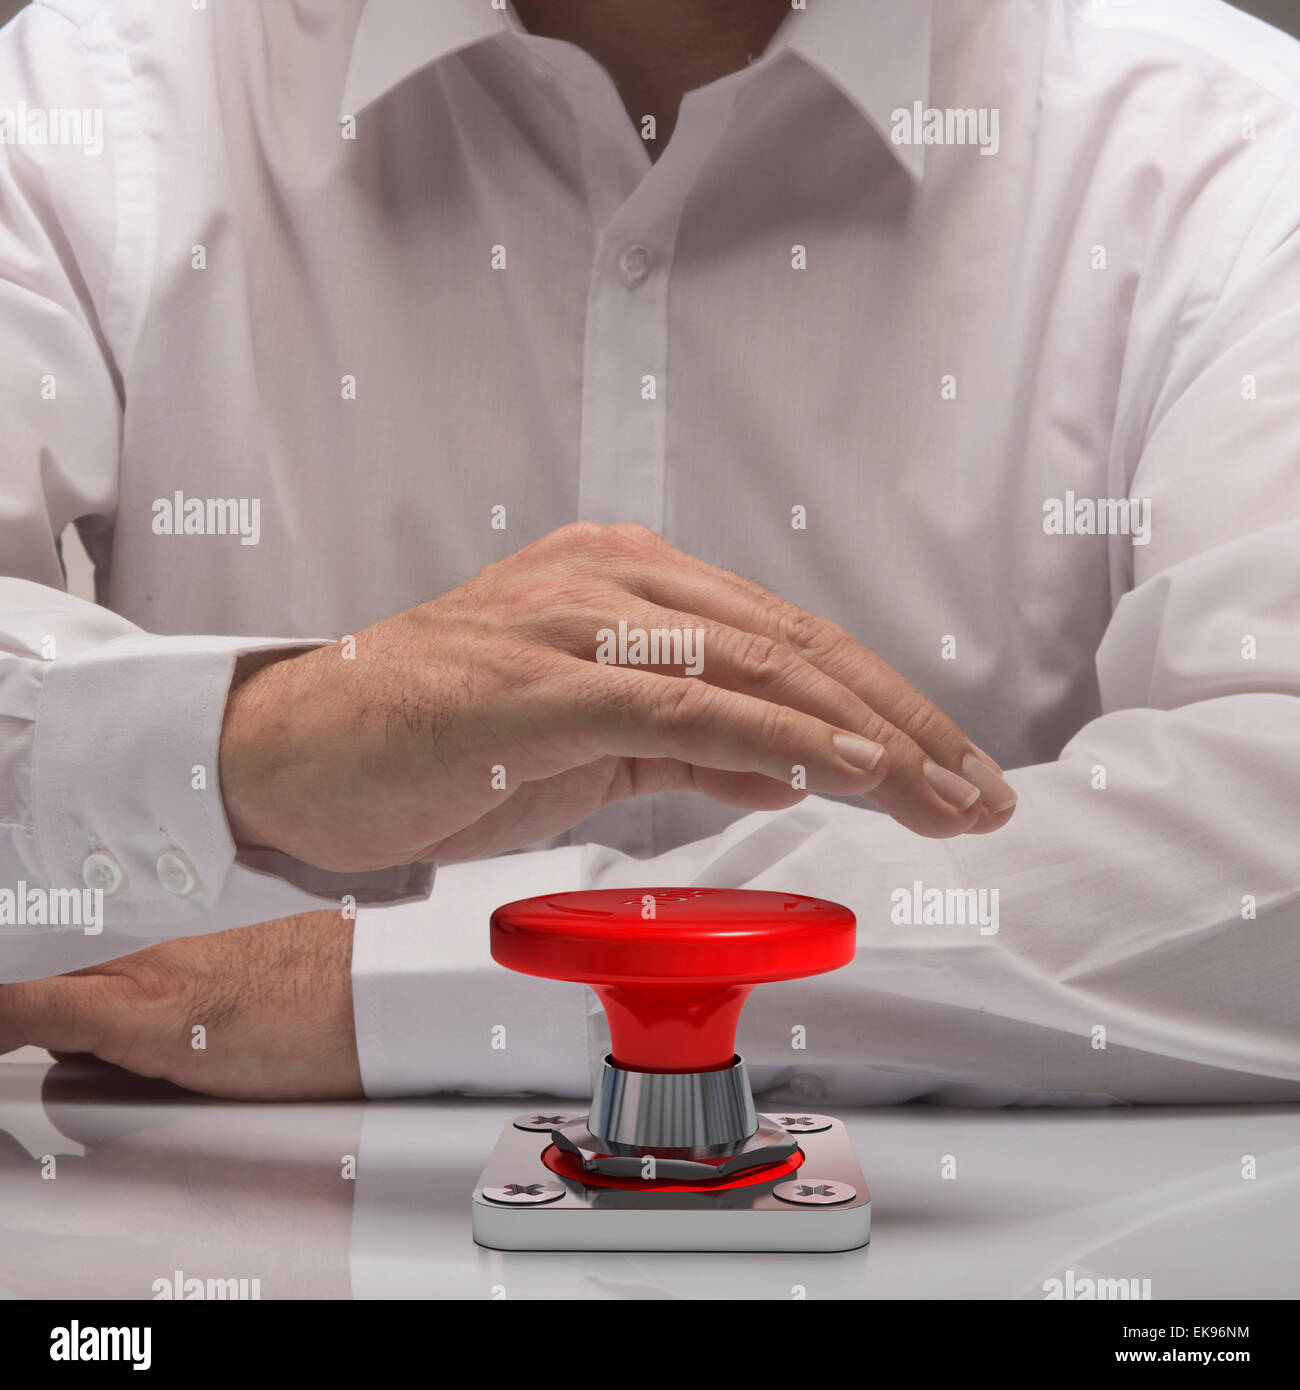 hand pushing emergency button, white shirt and reflexion. symbol of urgency and problem solving Stock Photo